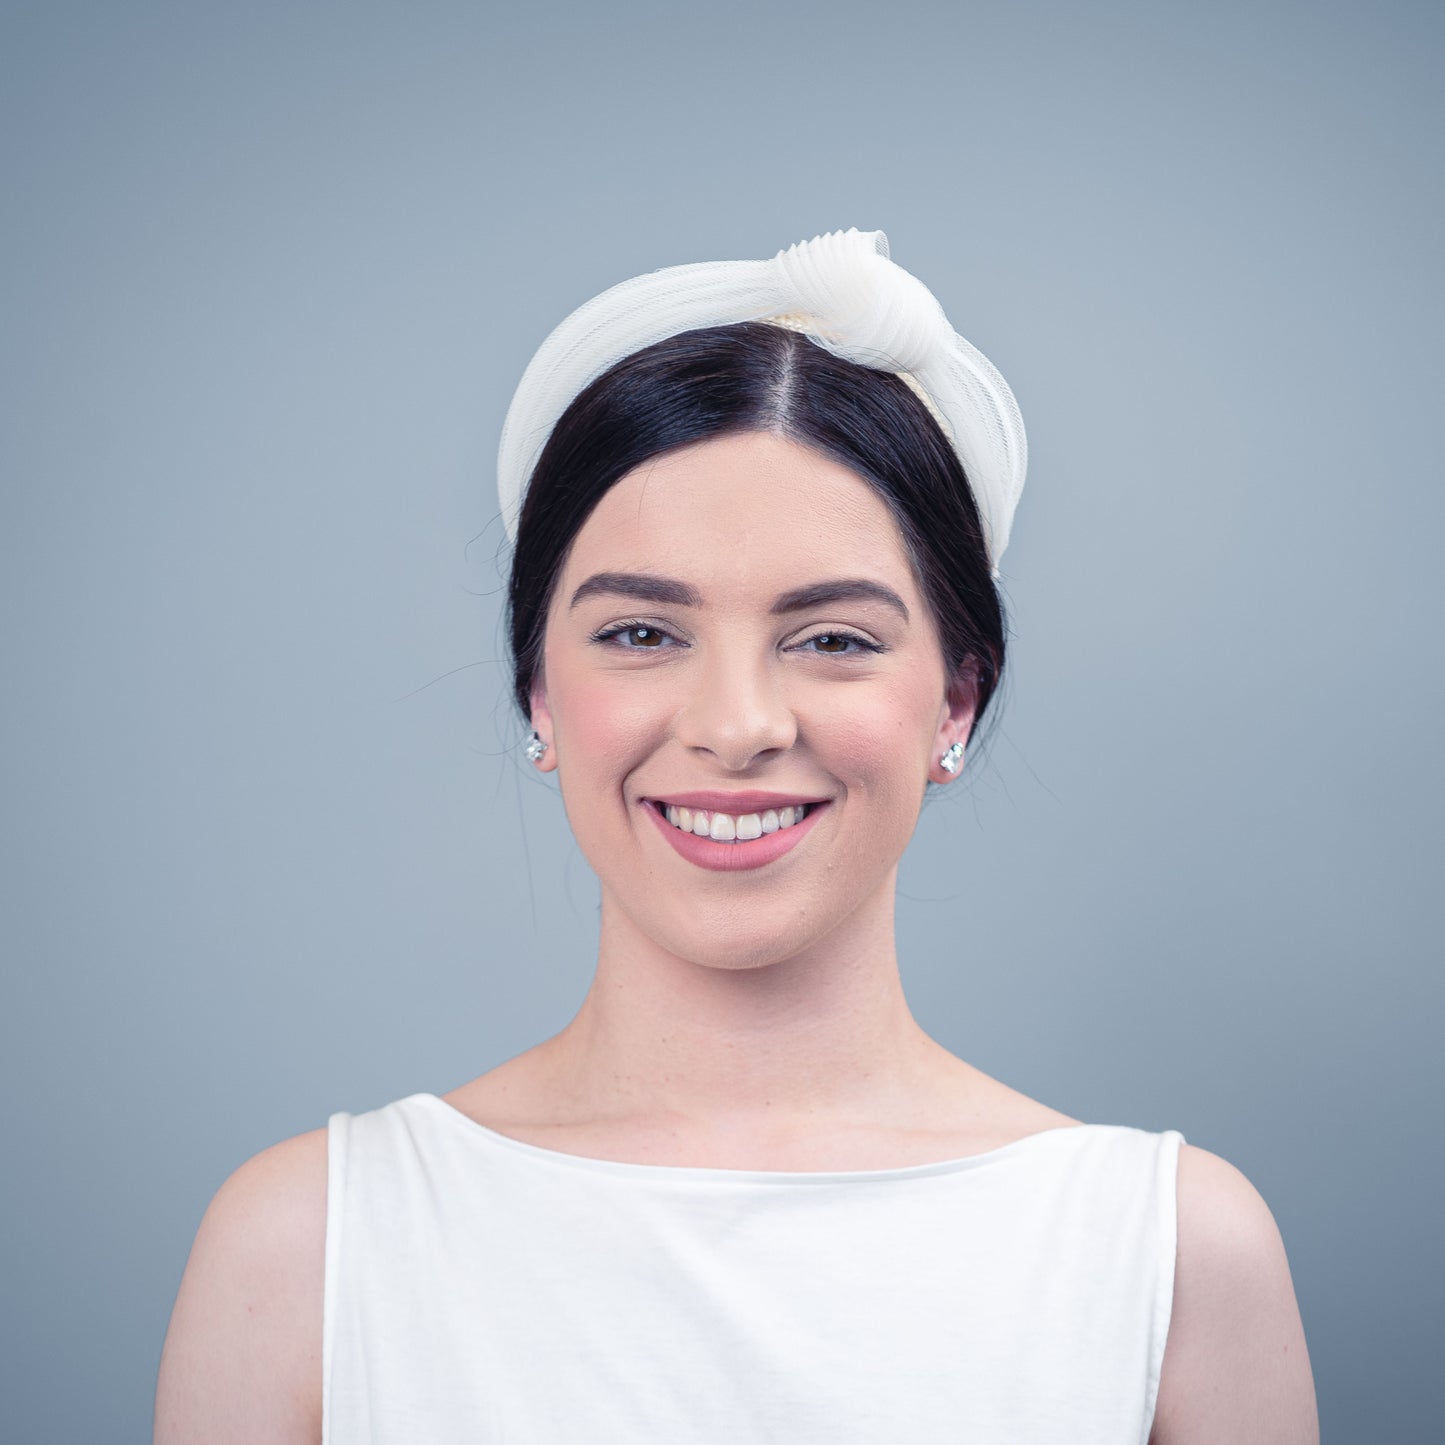 We Found Love pleated headband in ivory